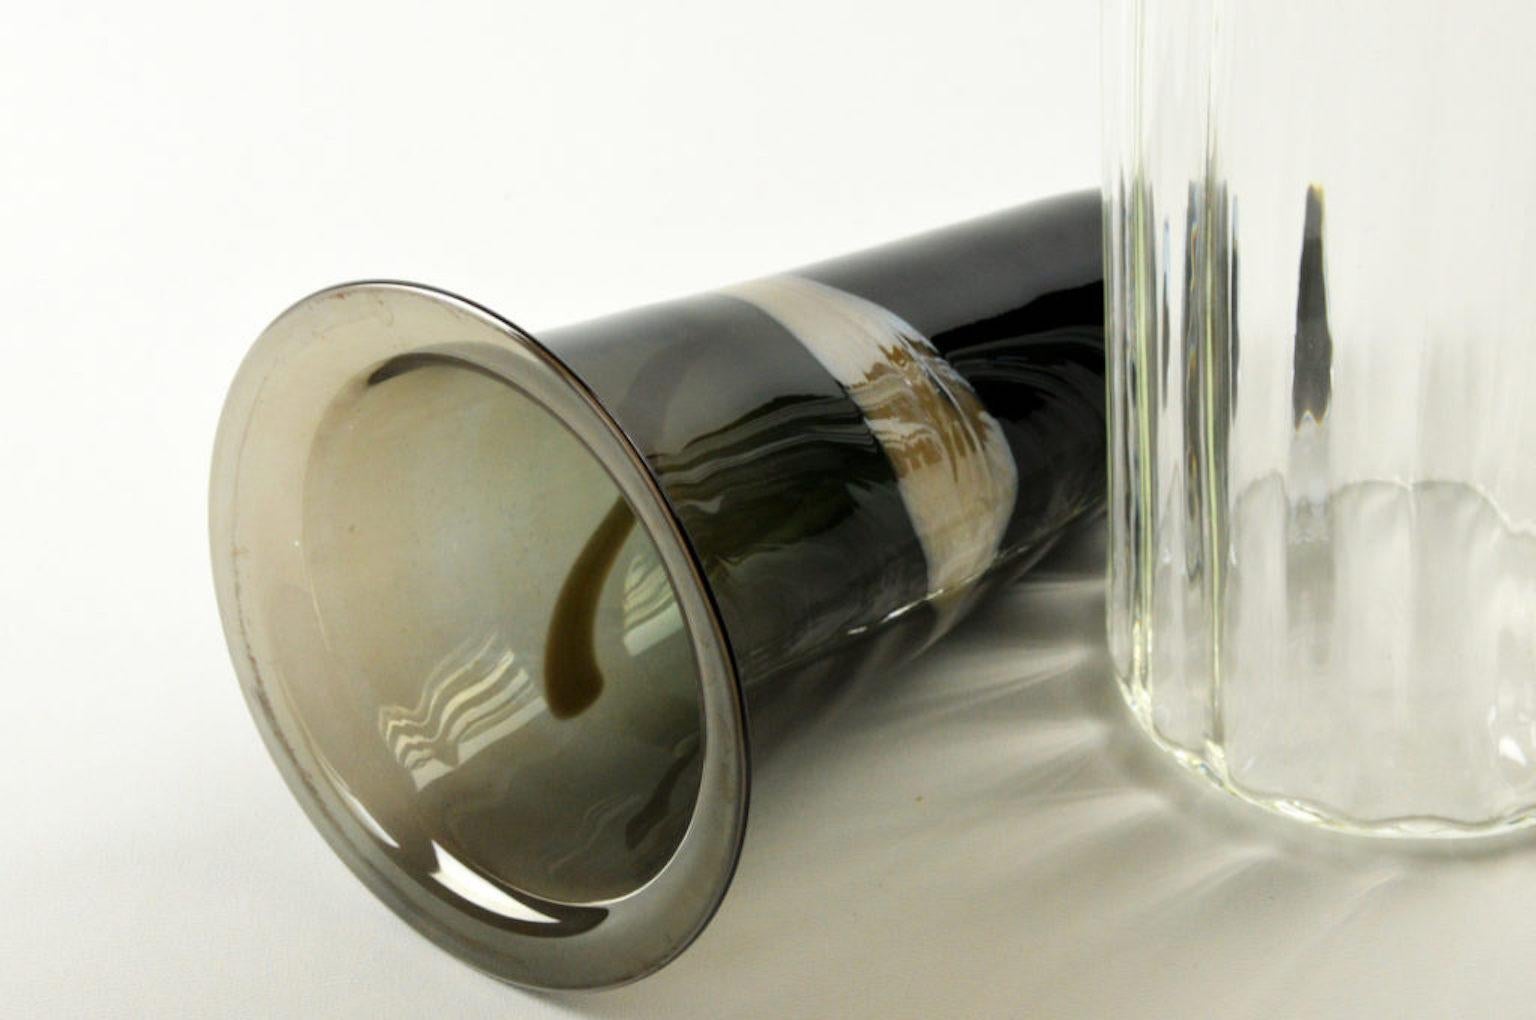 Vase by Atelier George: A blown glass clear vase in two parts, with a removable vase inside in amber or smoked colour. 